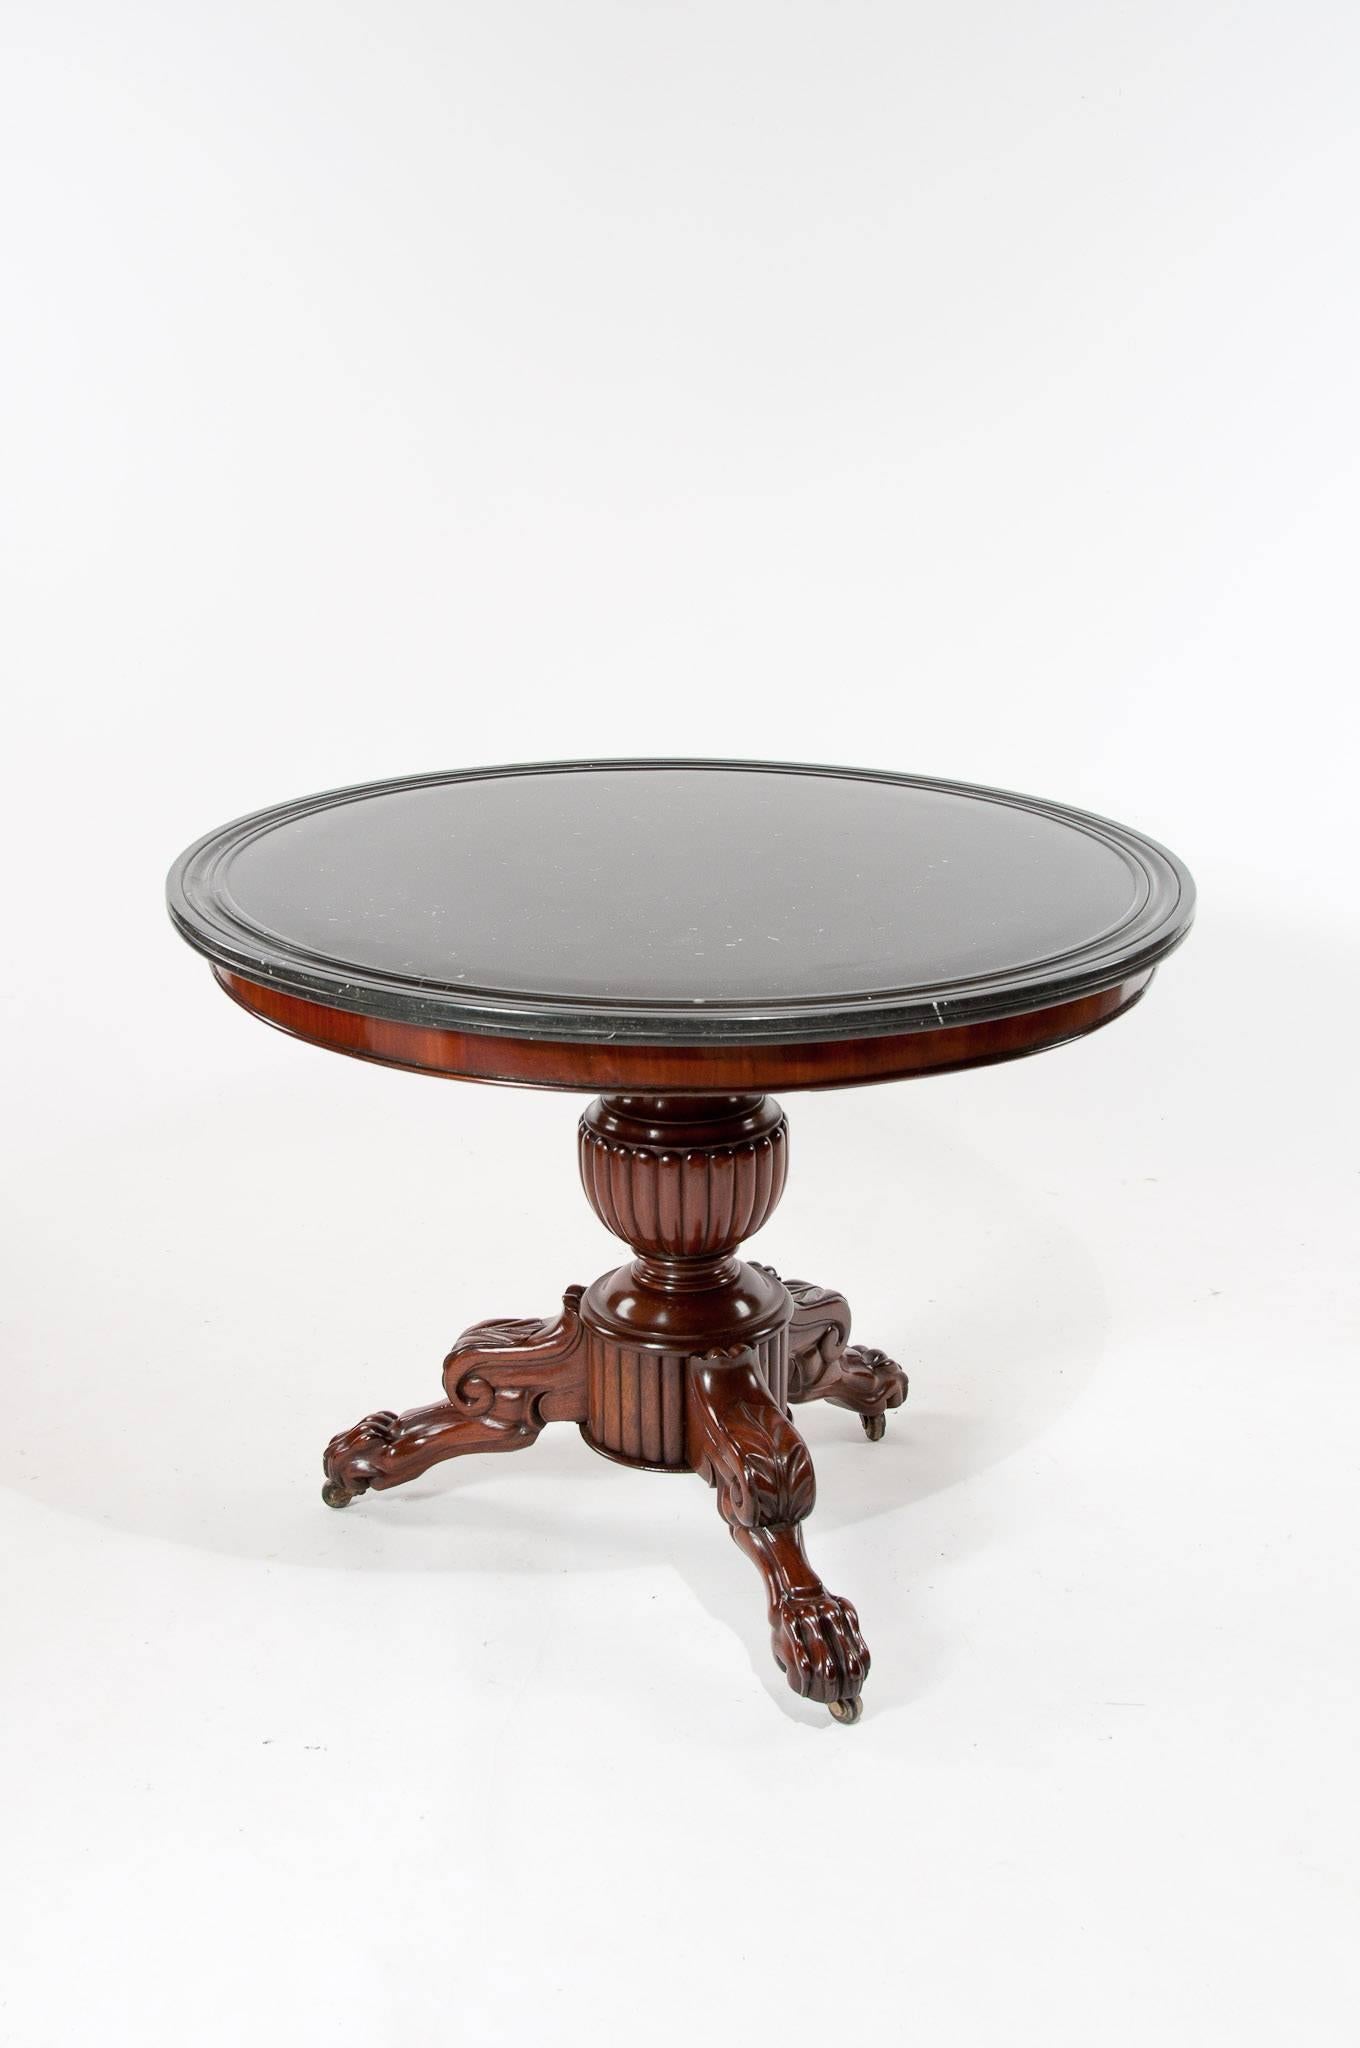 A good quality early 19th century, circa 1830 French marble topped gueridon center table. 

Having its original dished black Belgium marble-top over a circular mahogany veneered frieze with beaded edge supported by a turned and a gadrooned central